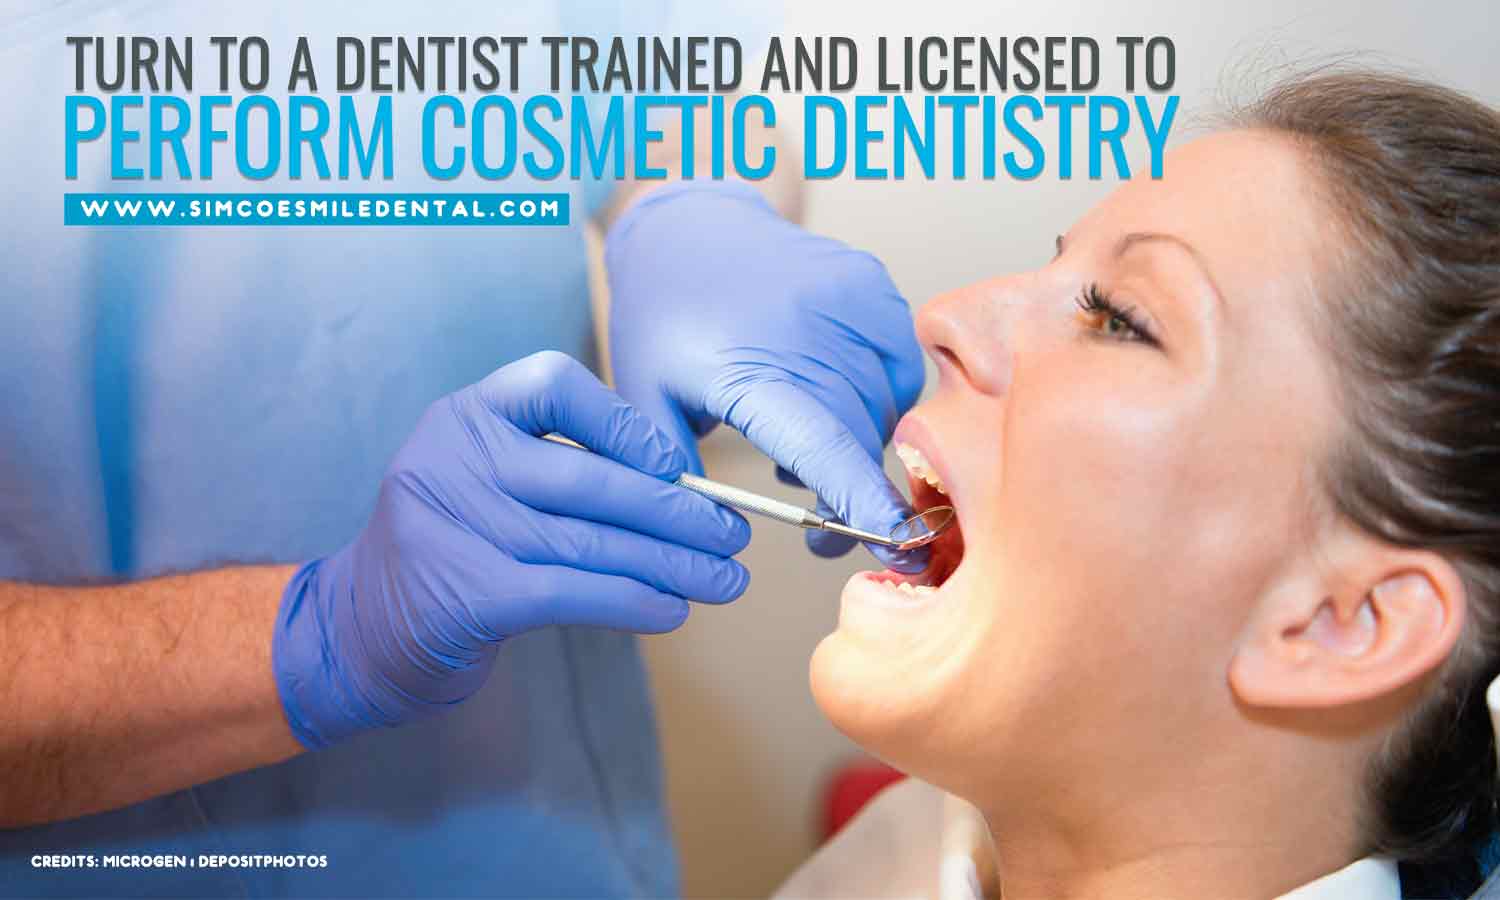 Turn-to-a-dentist-trained-and-licensed-to-perform-cosmetic-dentistry Improve Your Smile with Cosmetic Dentistry